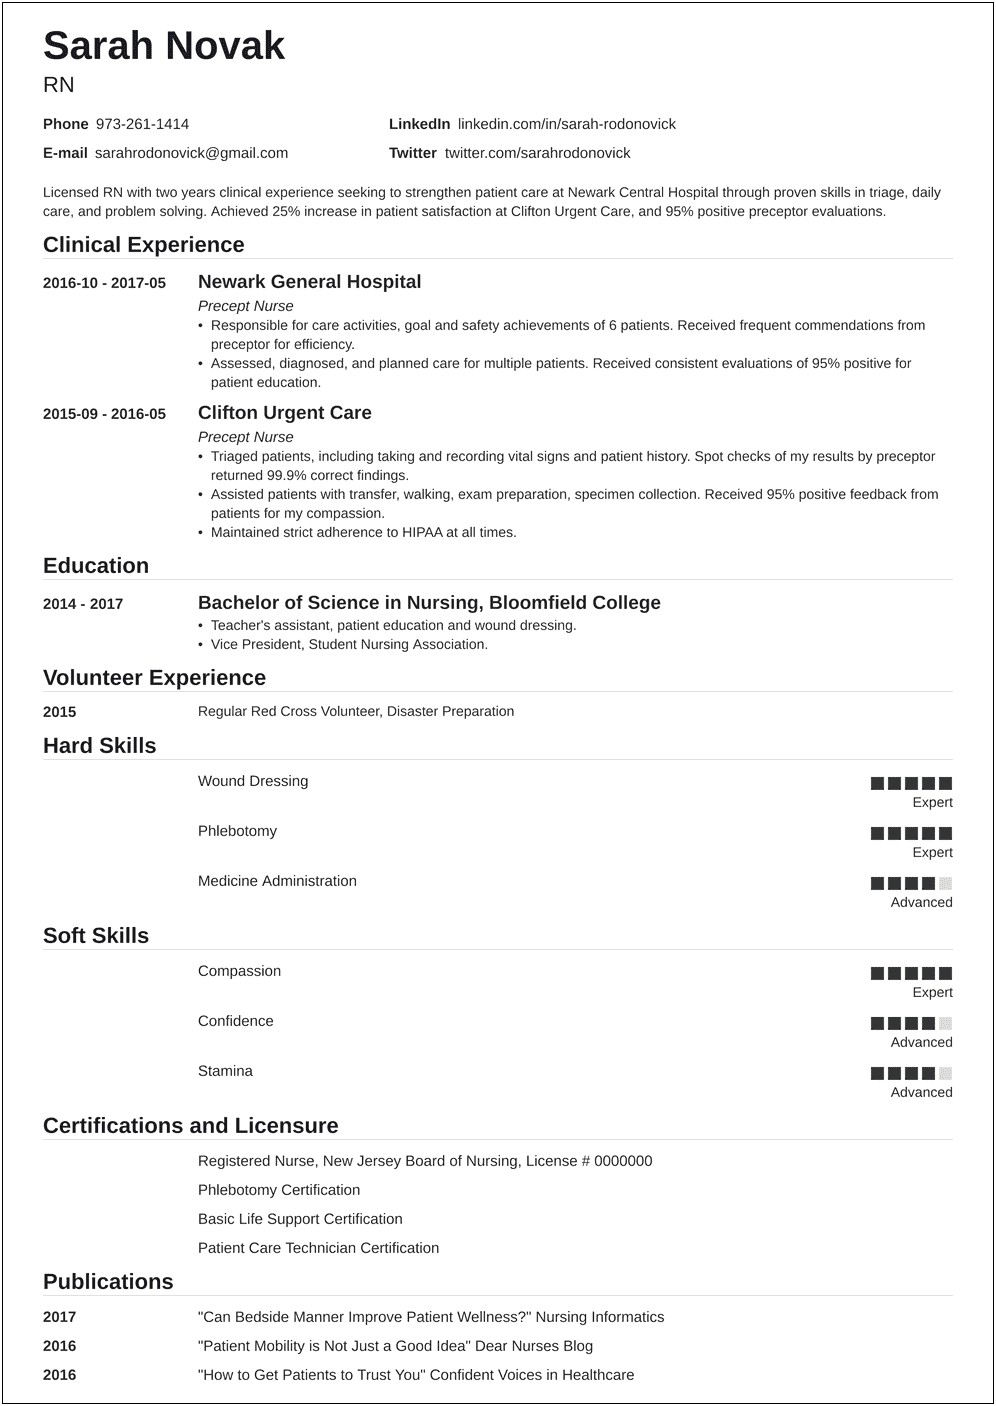 Work Experience Section Of Resume New Grad Rn